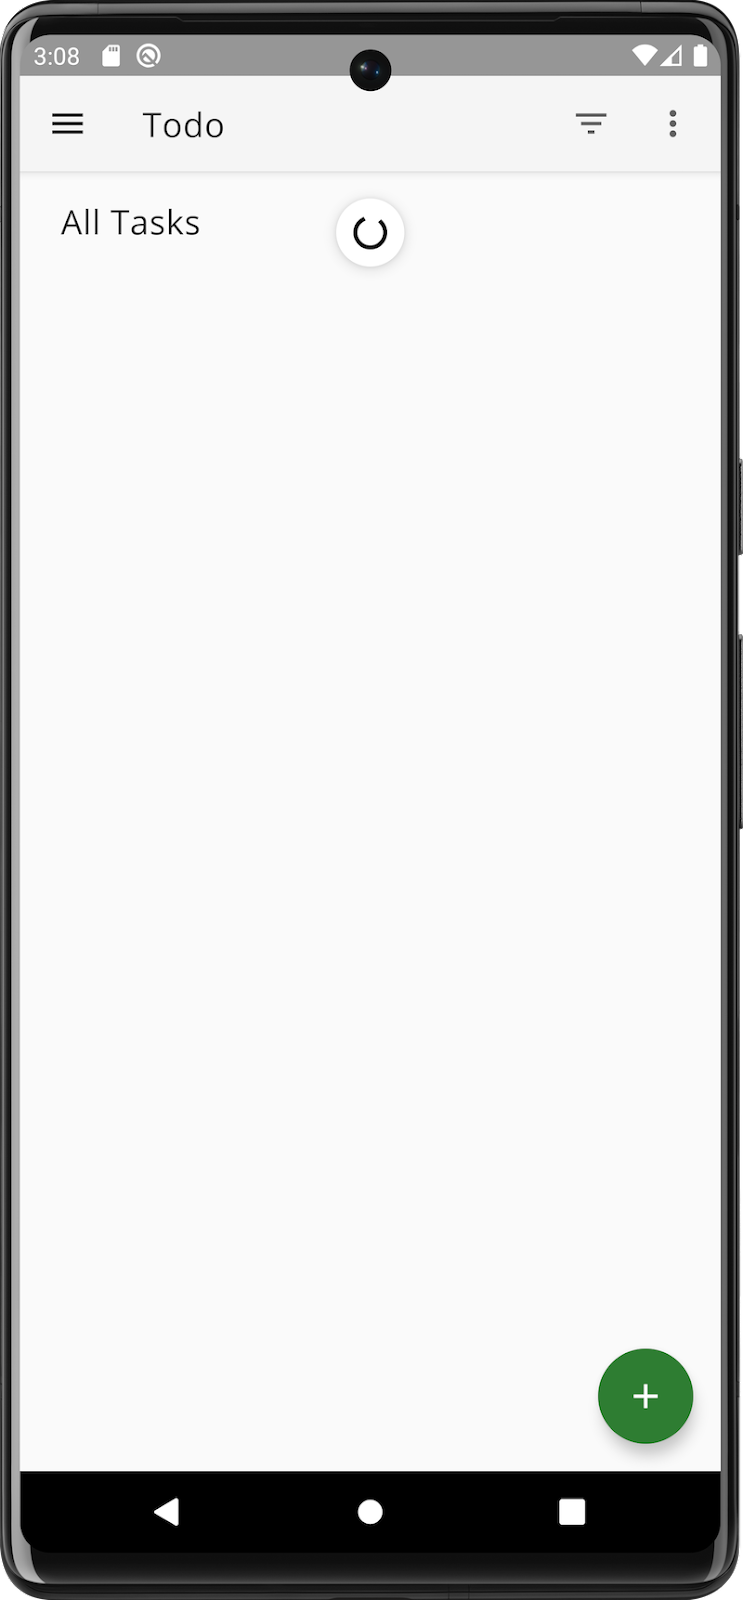 The app in its starting state with an infinite loading spinner.